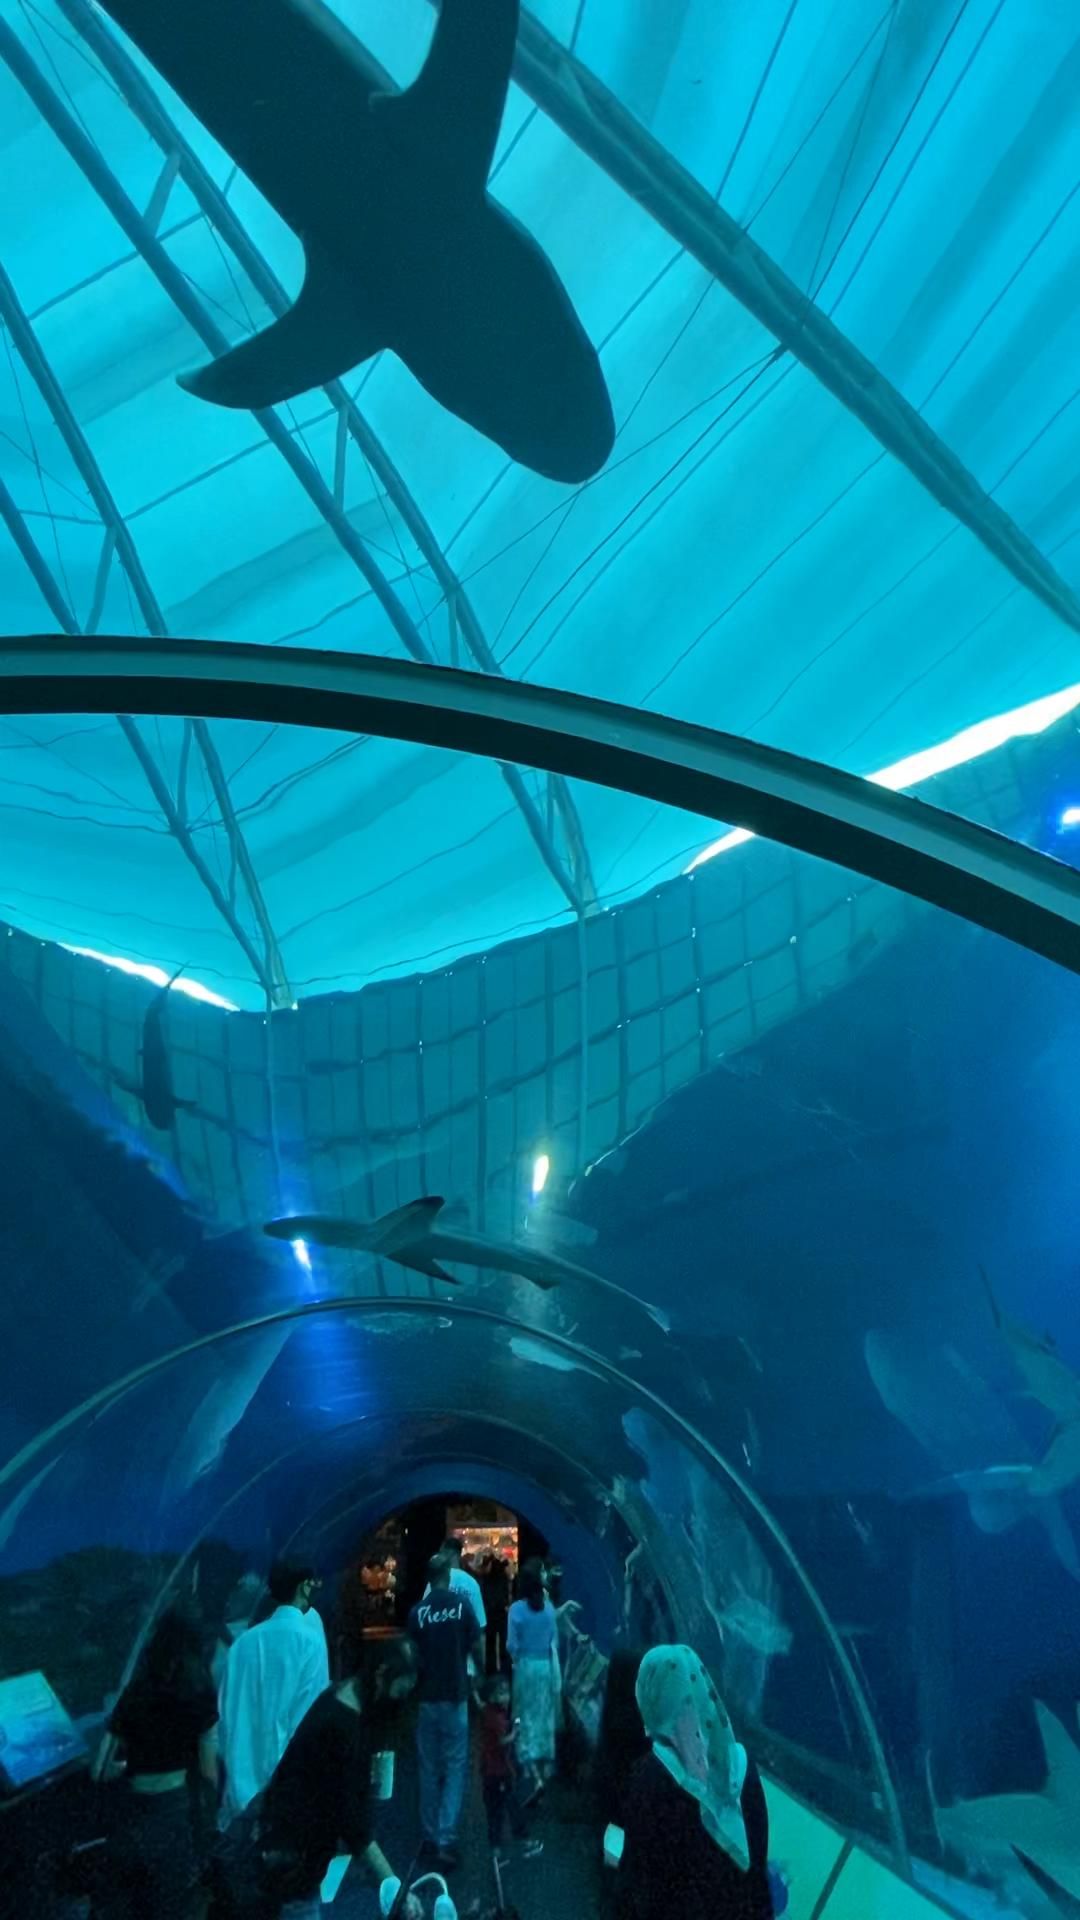 Would you swim in this shark tank? Why?